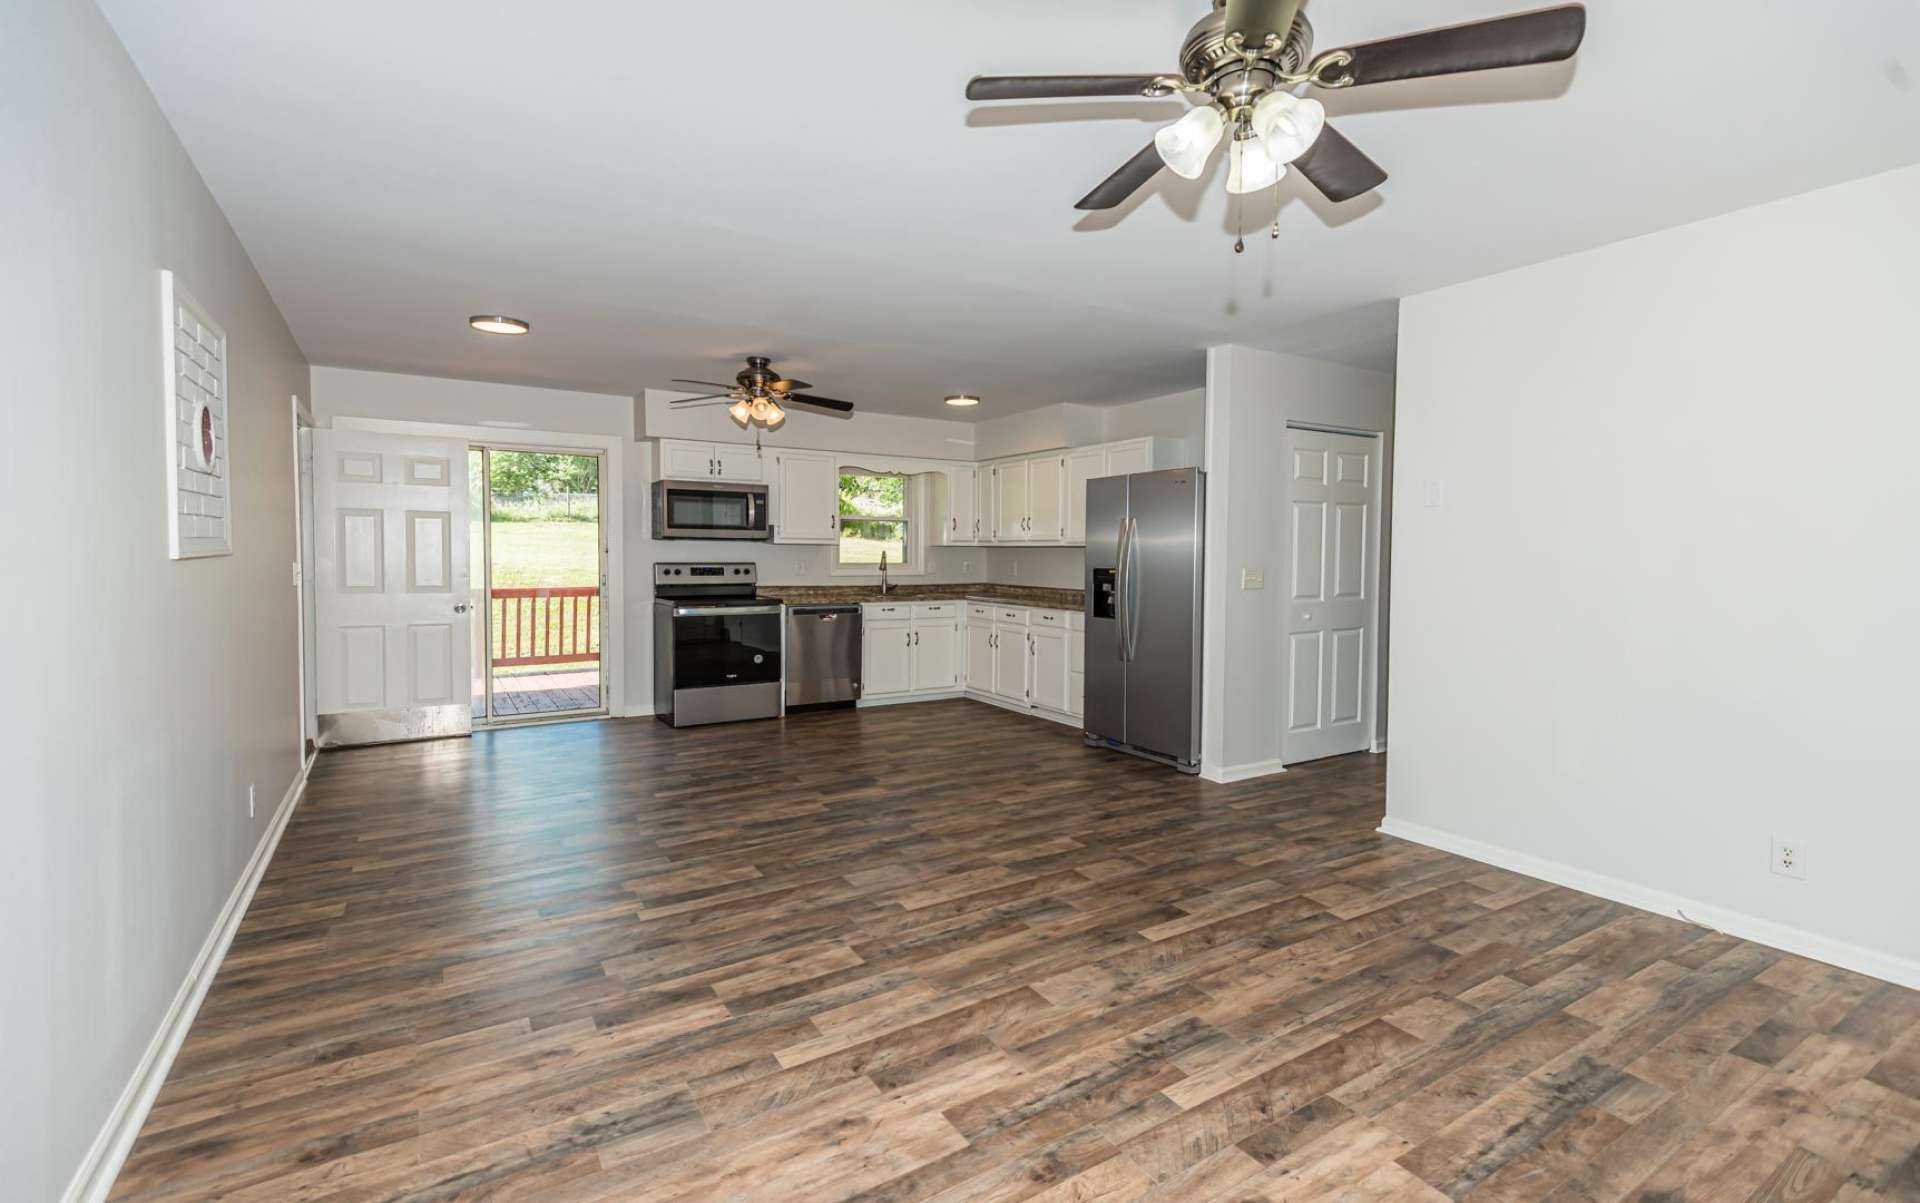 Walk into the living the great room and enjoy the spacious living areas this home offers.